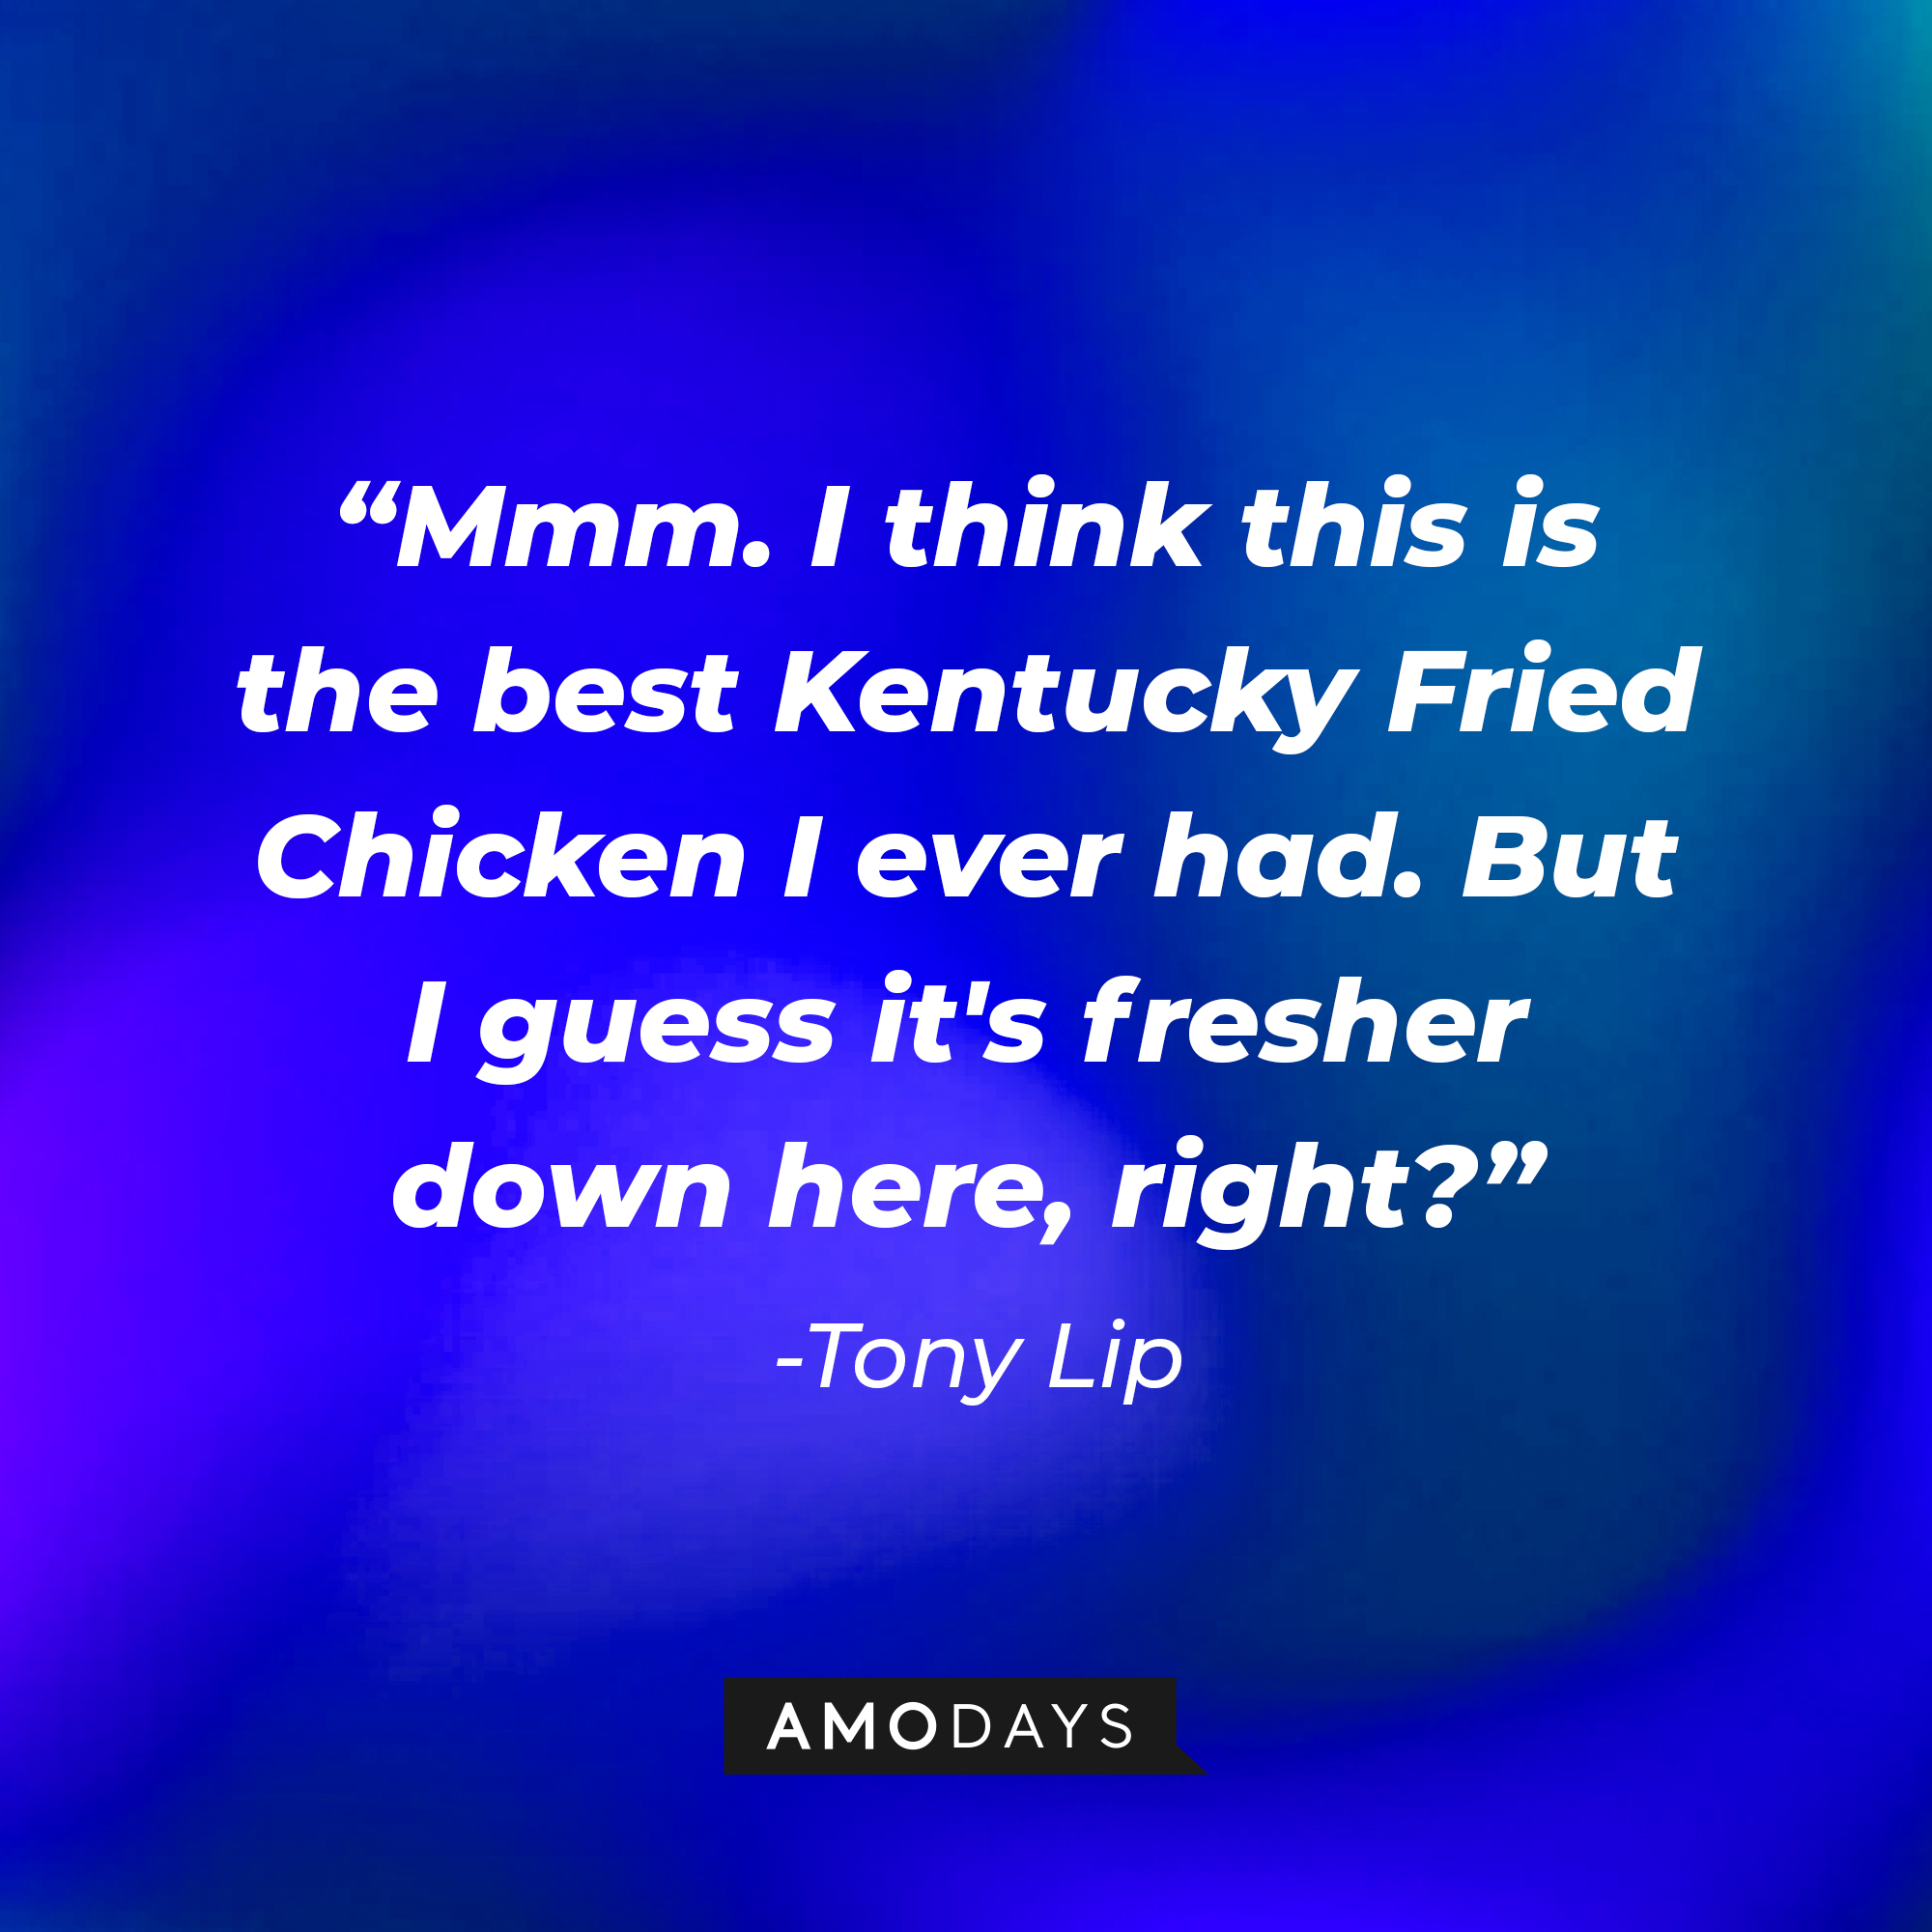 Tony Lip's quote: “Mmm. I think this is the best Kentucky Fried Chicken I ever had. But I guess it's fresher down here, right?” | Source: Amodays